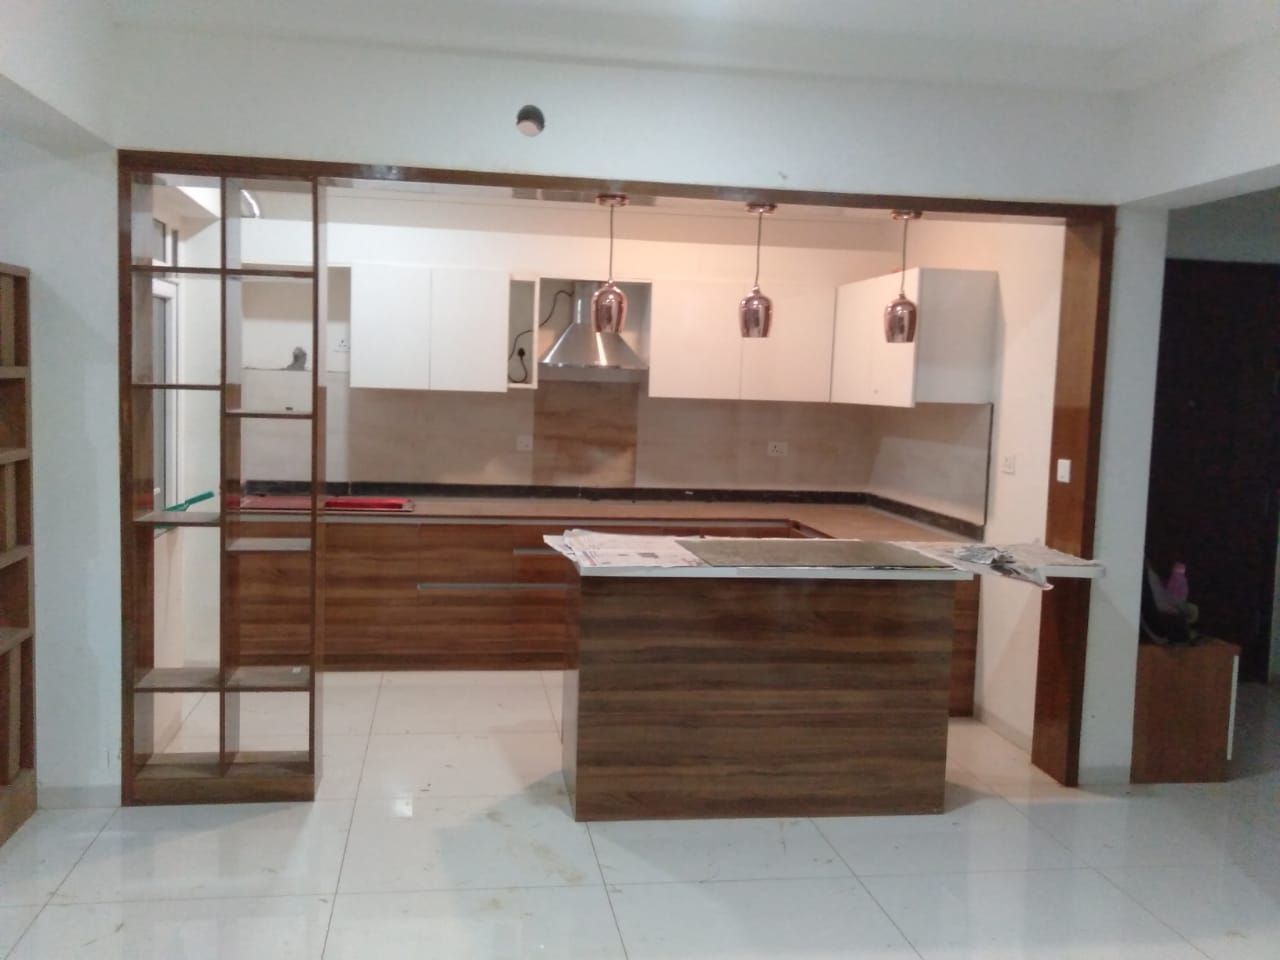 Mr.Unnikrishnan's Residence, Urban Forest, Whitefield, Bangalore, Design Space Design Space Modern kitchen Plywood Cabinets & shelves